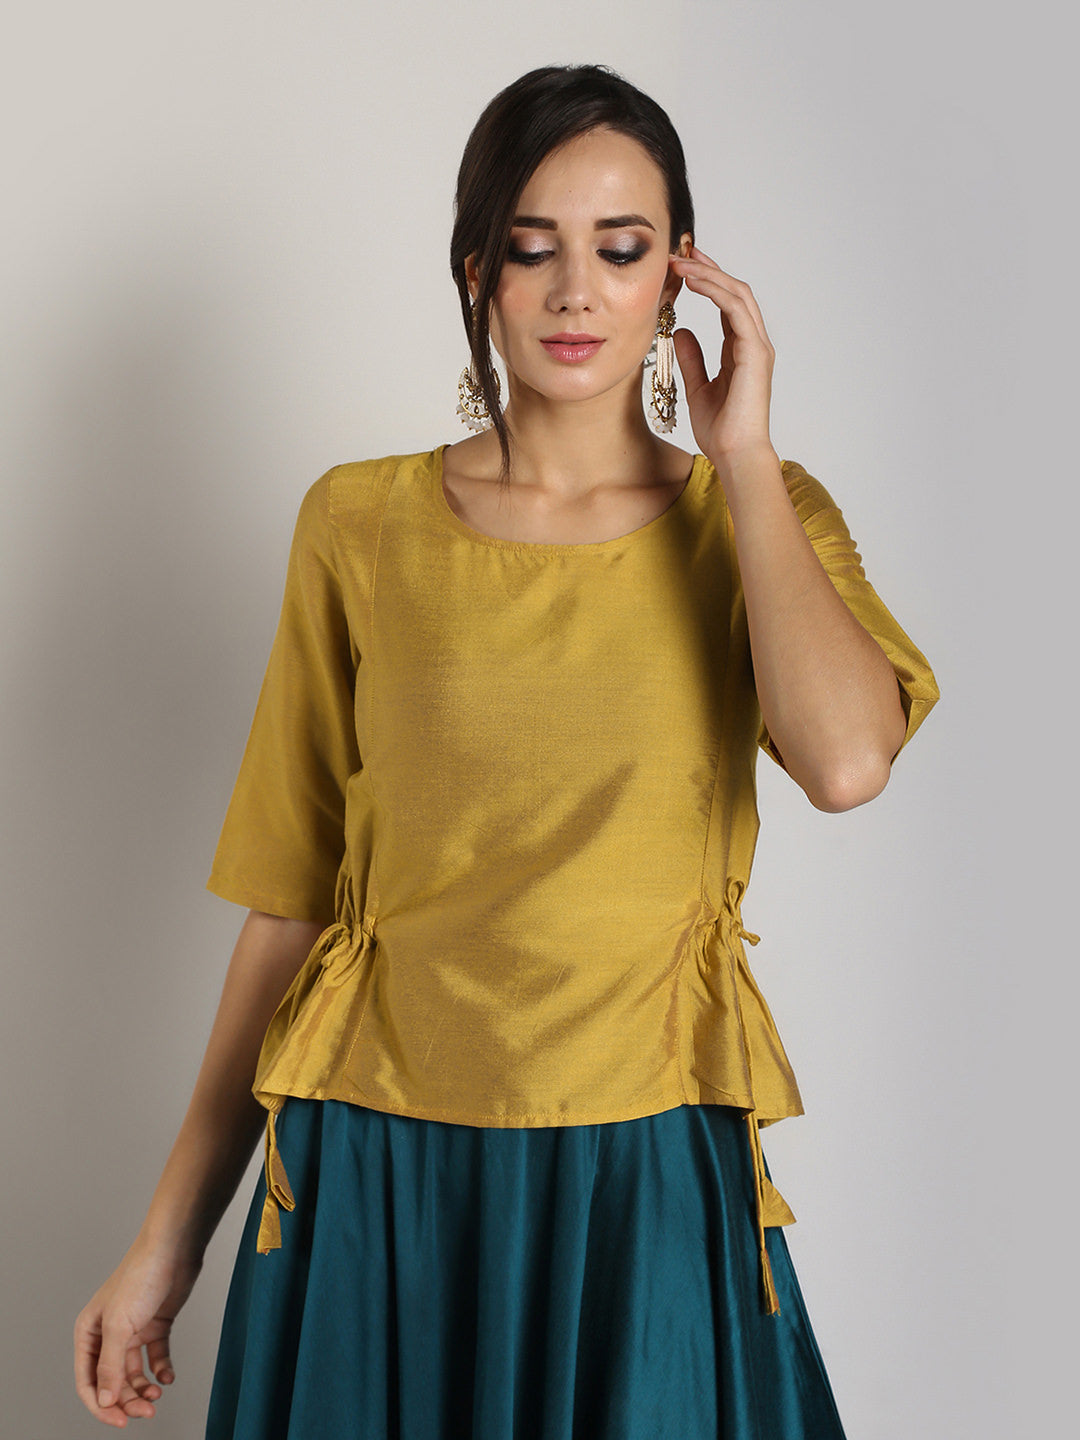 Abhishti Brocade Top with contrast color detail paired with Skirt